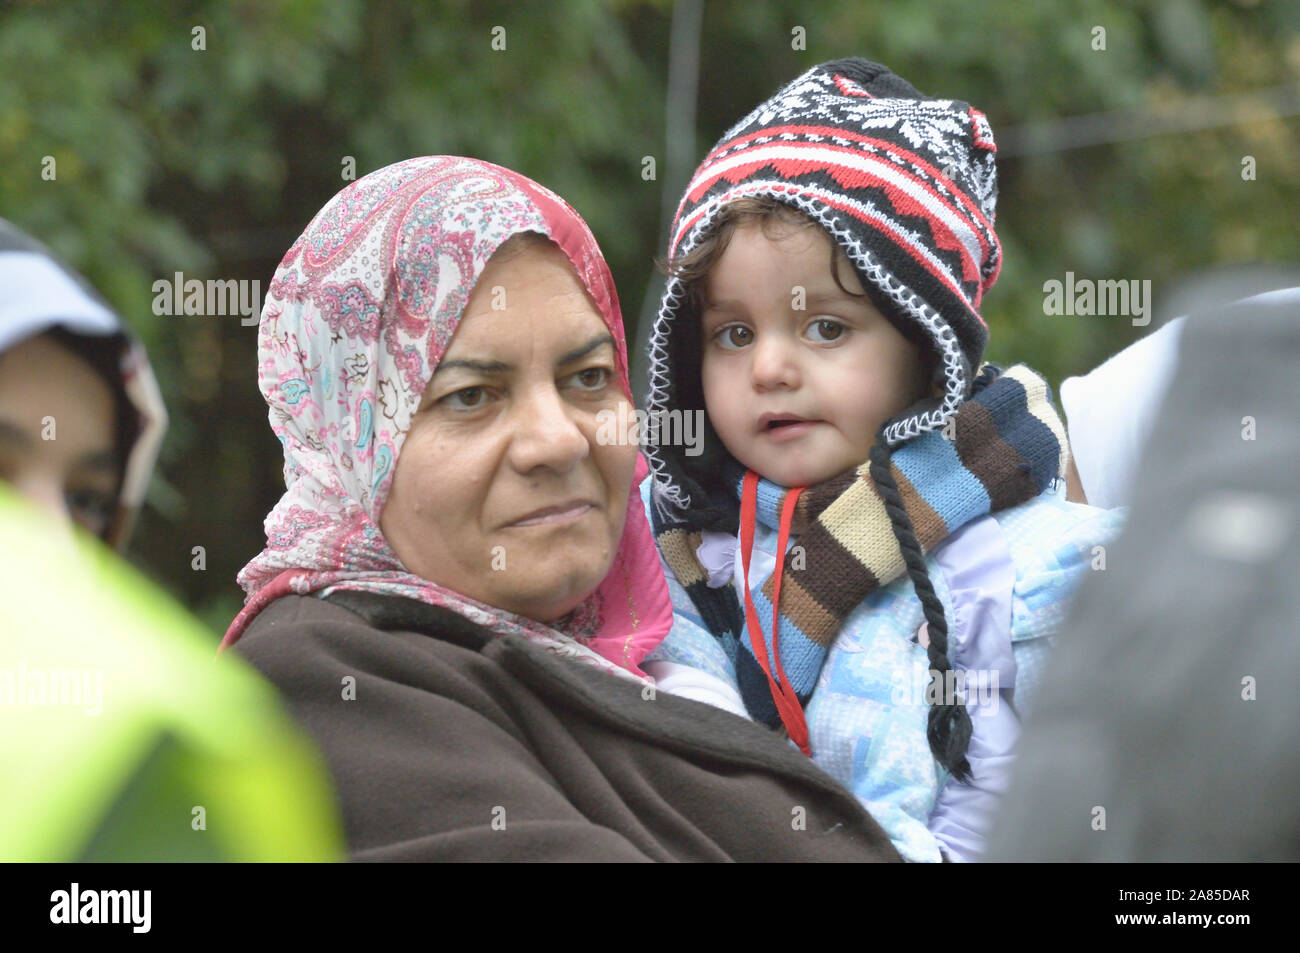 An Iraqi refugee woman holds her 18-month old daughter, Mahdi, as they approach the border into Croatia near the Serbian village of Berkasovo. Stock Photo